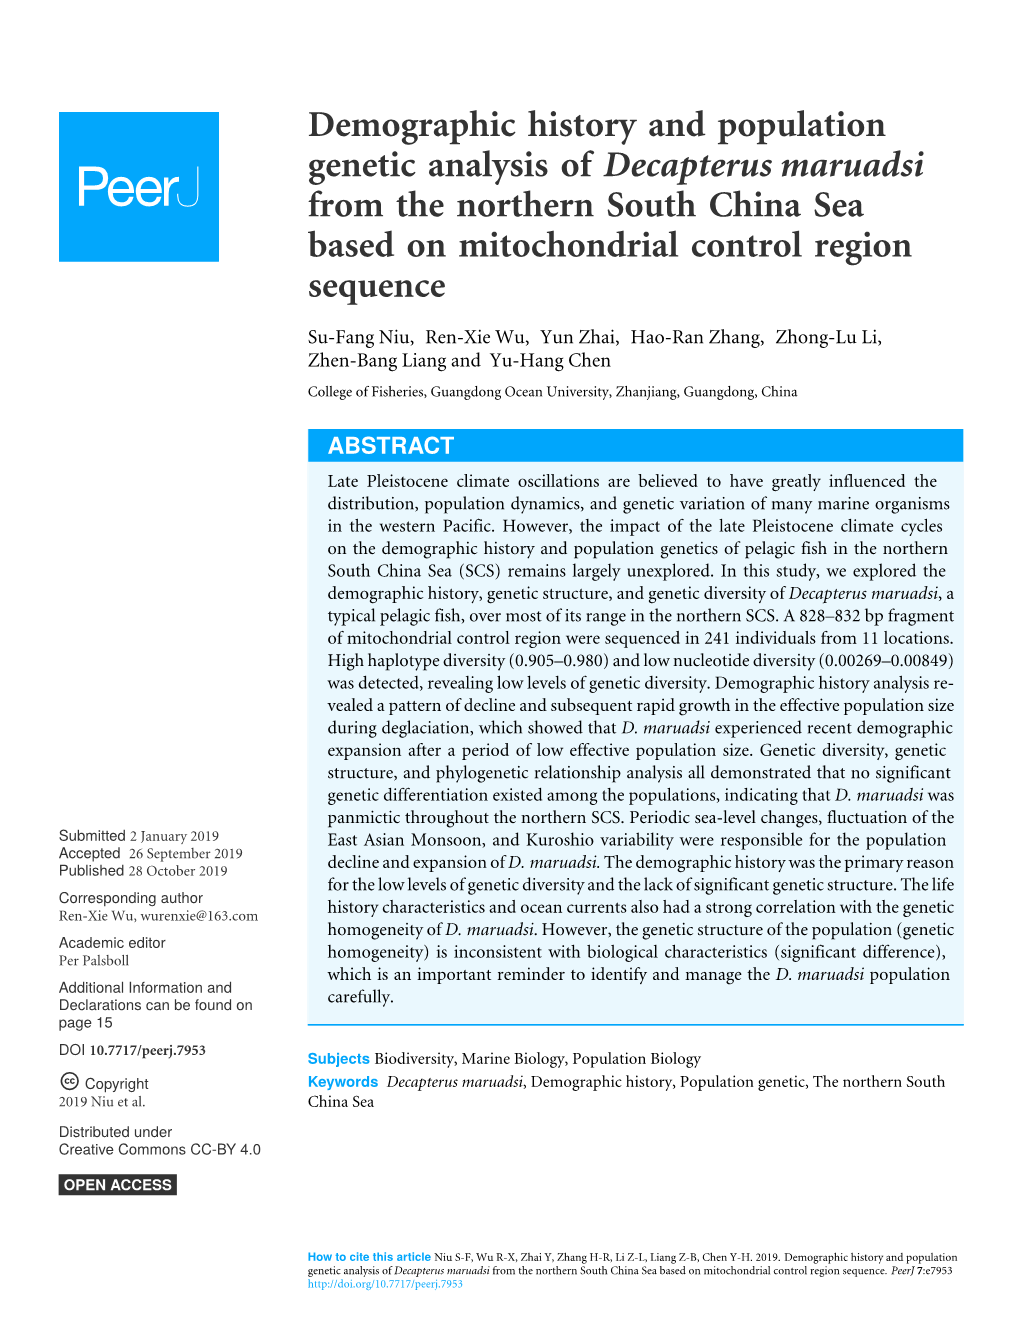 Demographic History and Population Genetic Analysis of Decapterus Maruadsi from the Northern South China Sea Based on Mitochondrial Control Region Sequence